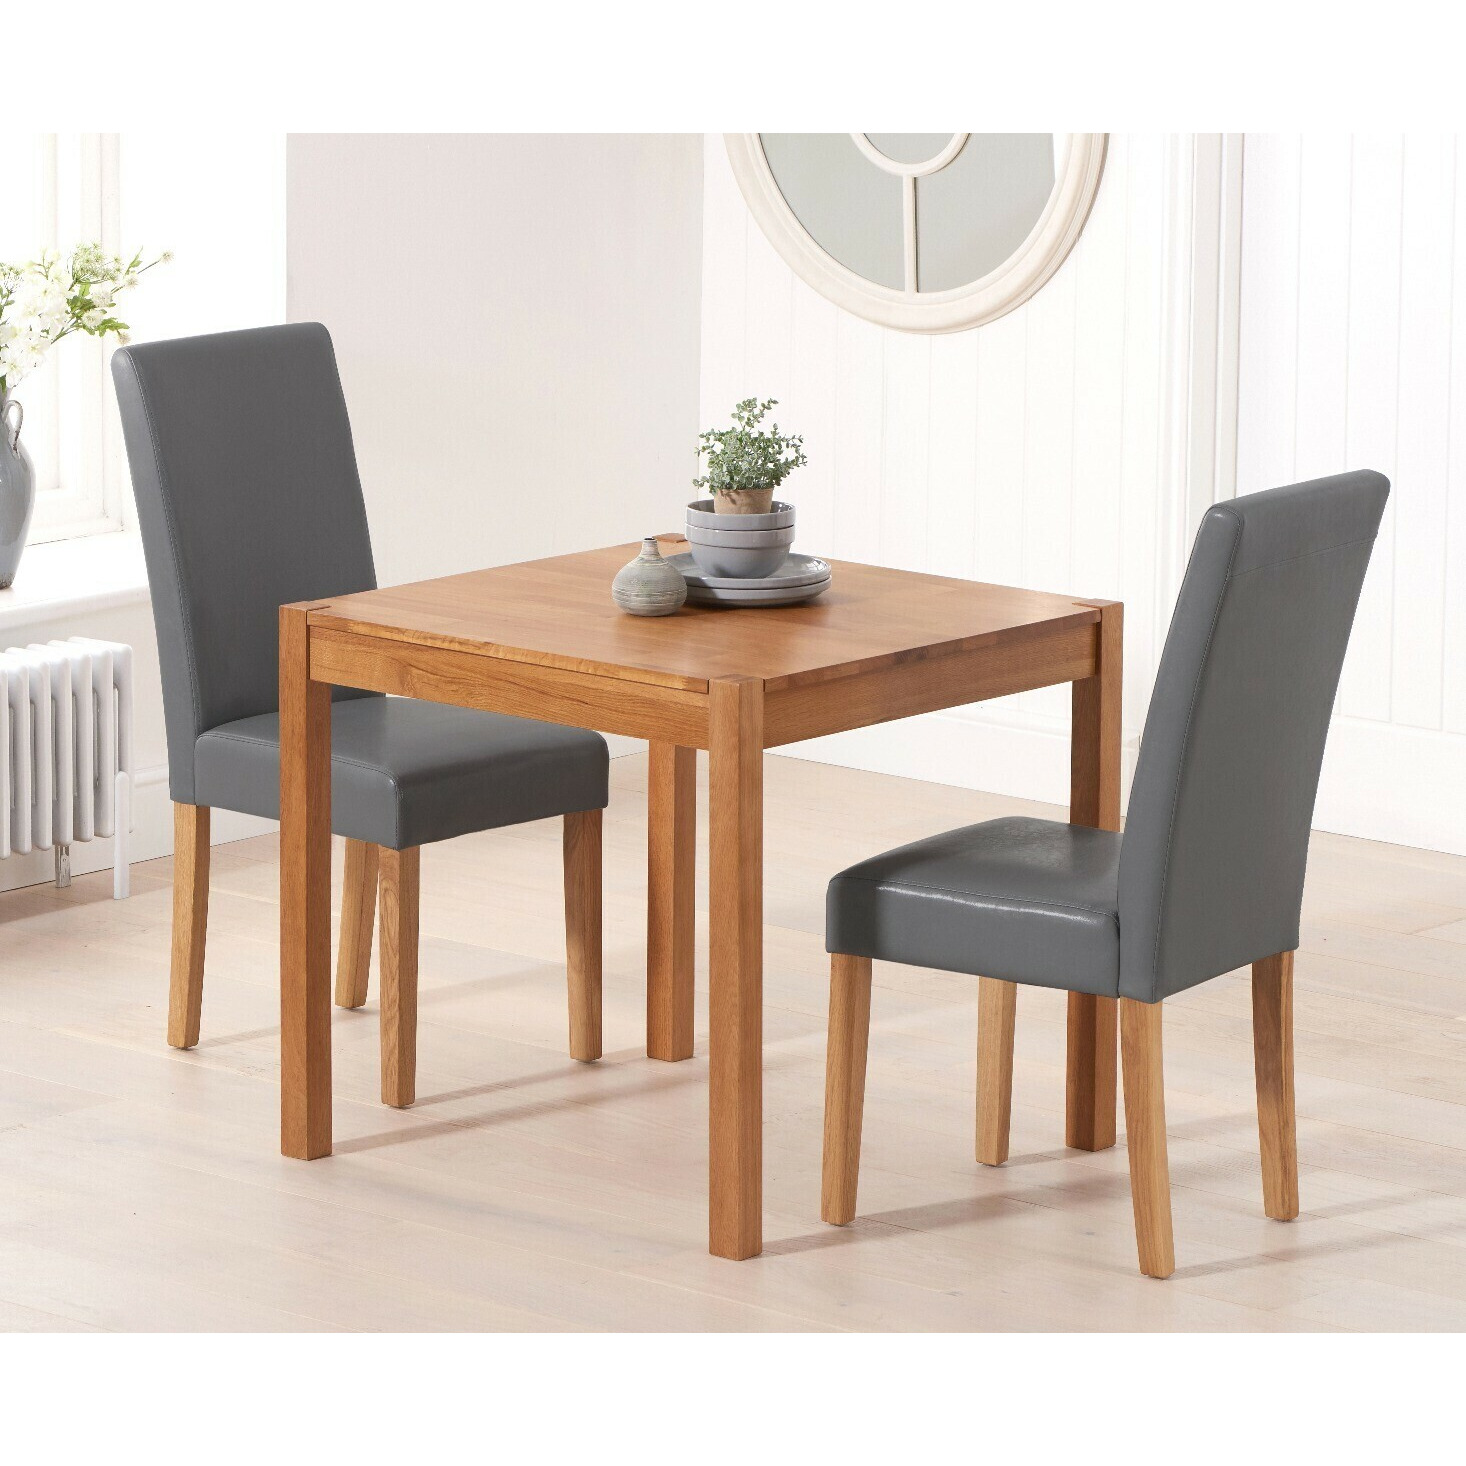 York 80cm Solid Oak Dining Table With 2 Grey Olivia Chairs